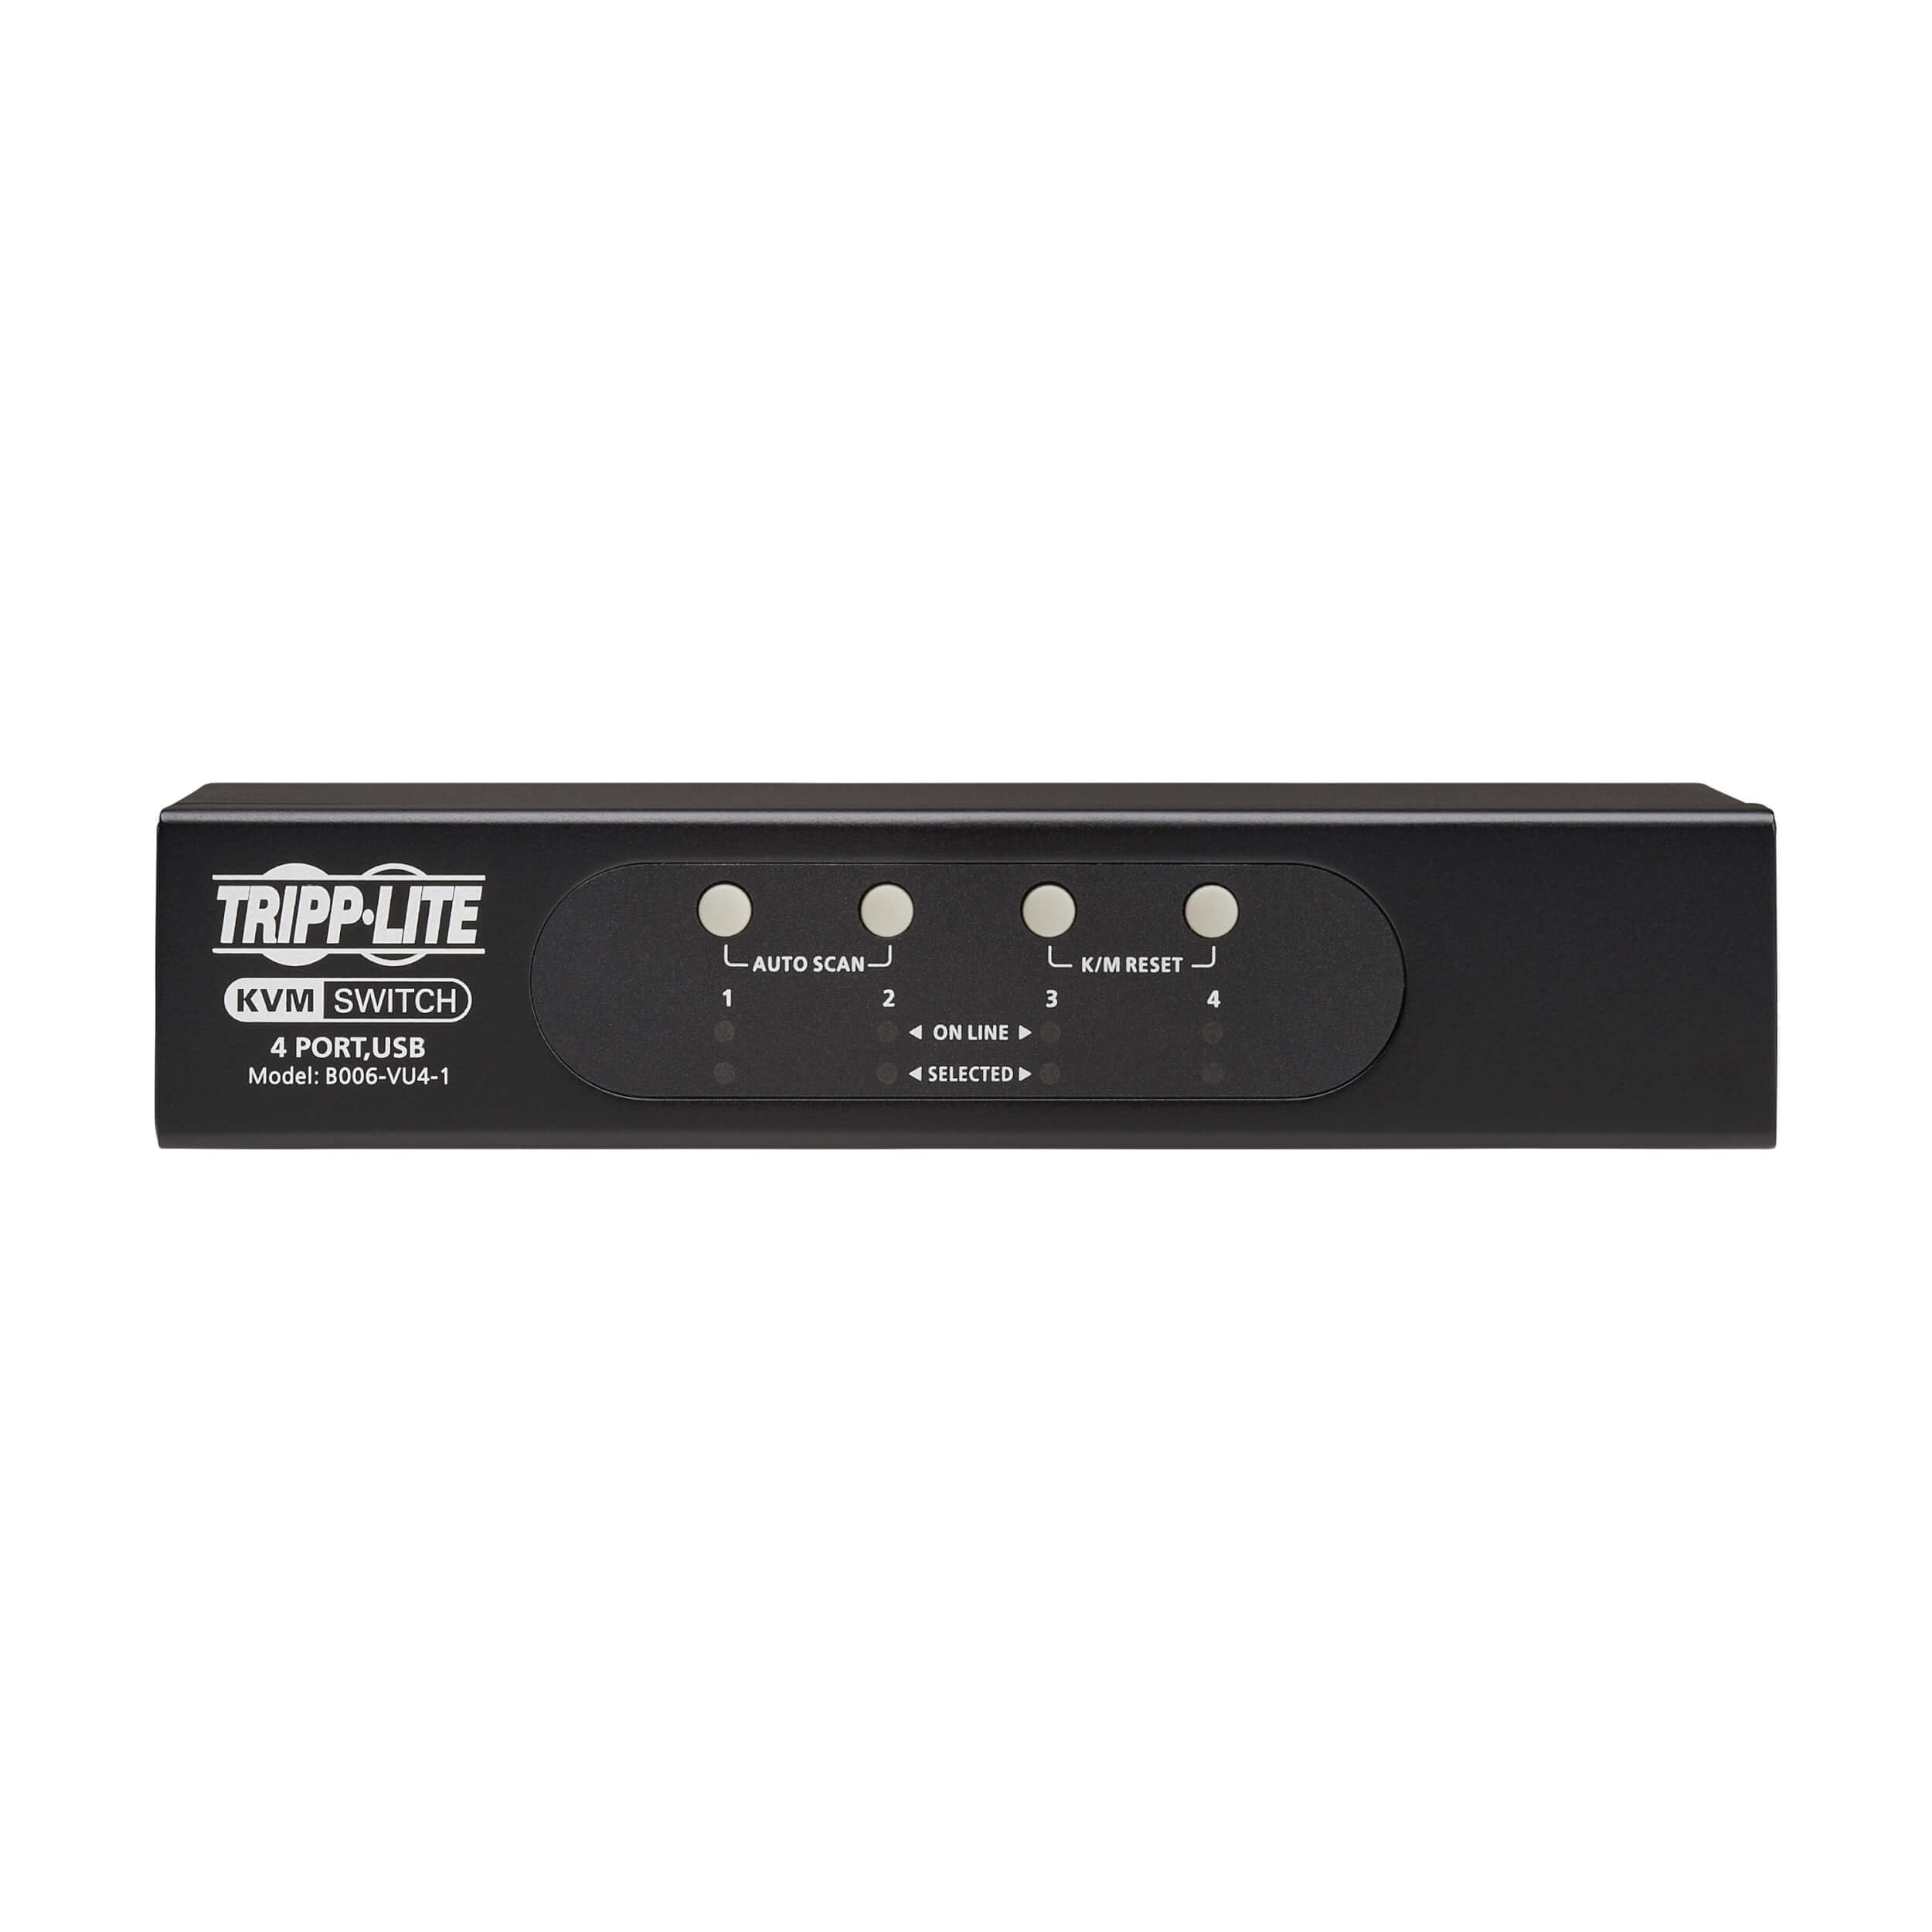 Tripp Lite 4-Port KVM Switch VGA with USB or PS/2 Port for Keyboard Mouse, Desktop PC, 4 Computers 1 Monitor, Plug and Play - Windows, macOS, Linux Compatible - 3-Year Warranty (B006-VU4-1)